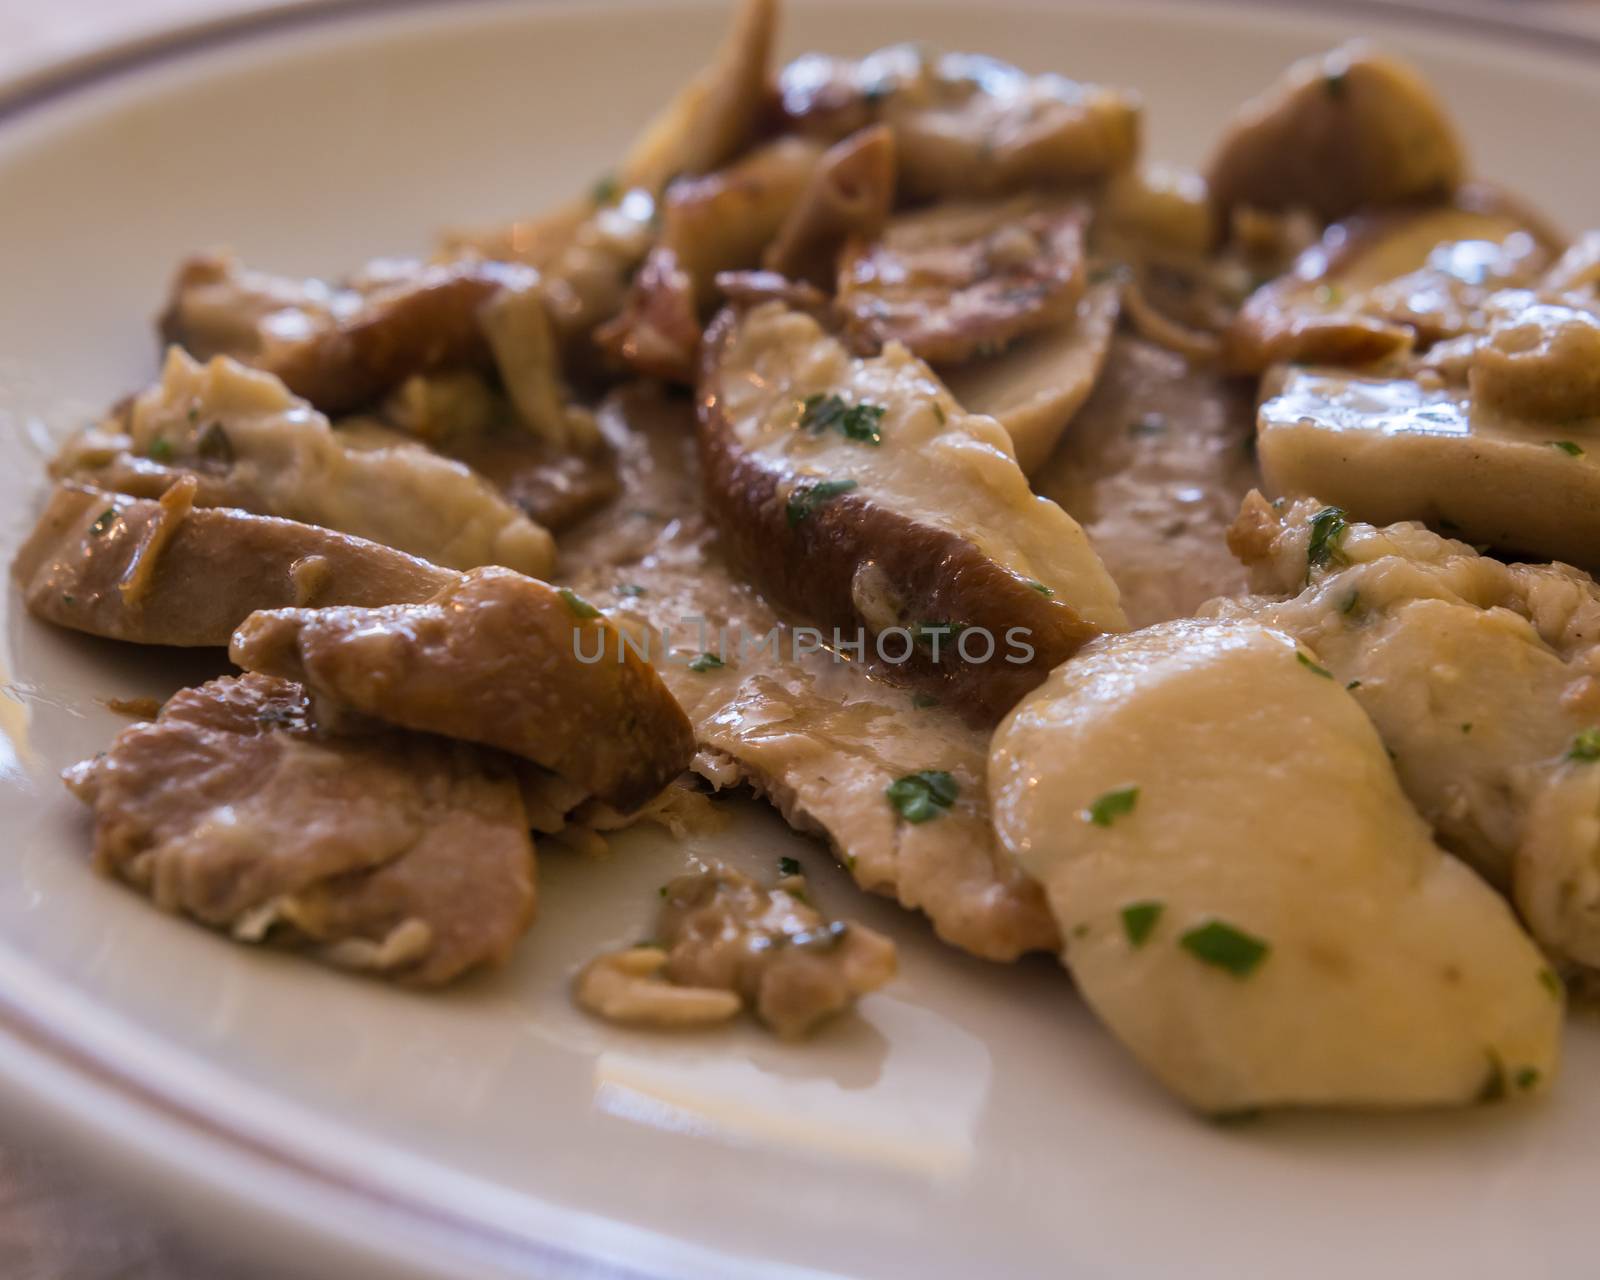 Veal cutlet with mushrooms porcini and cream.